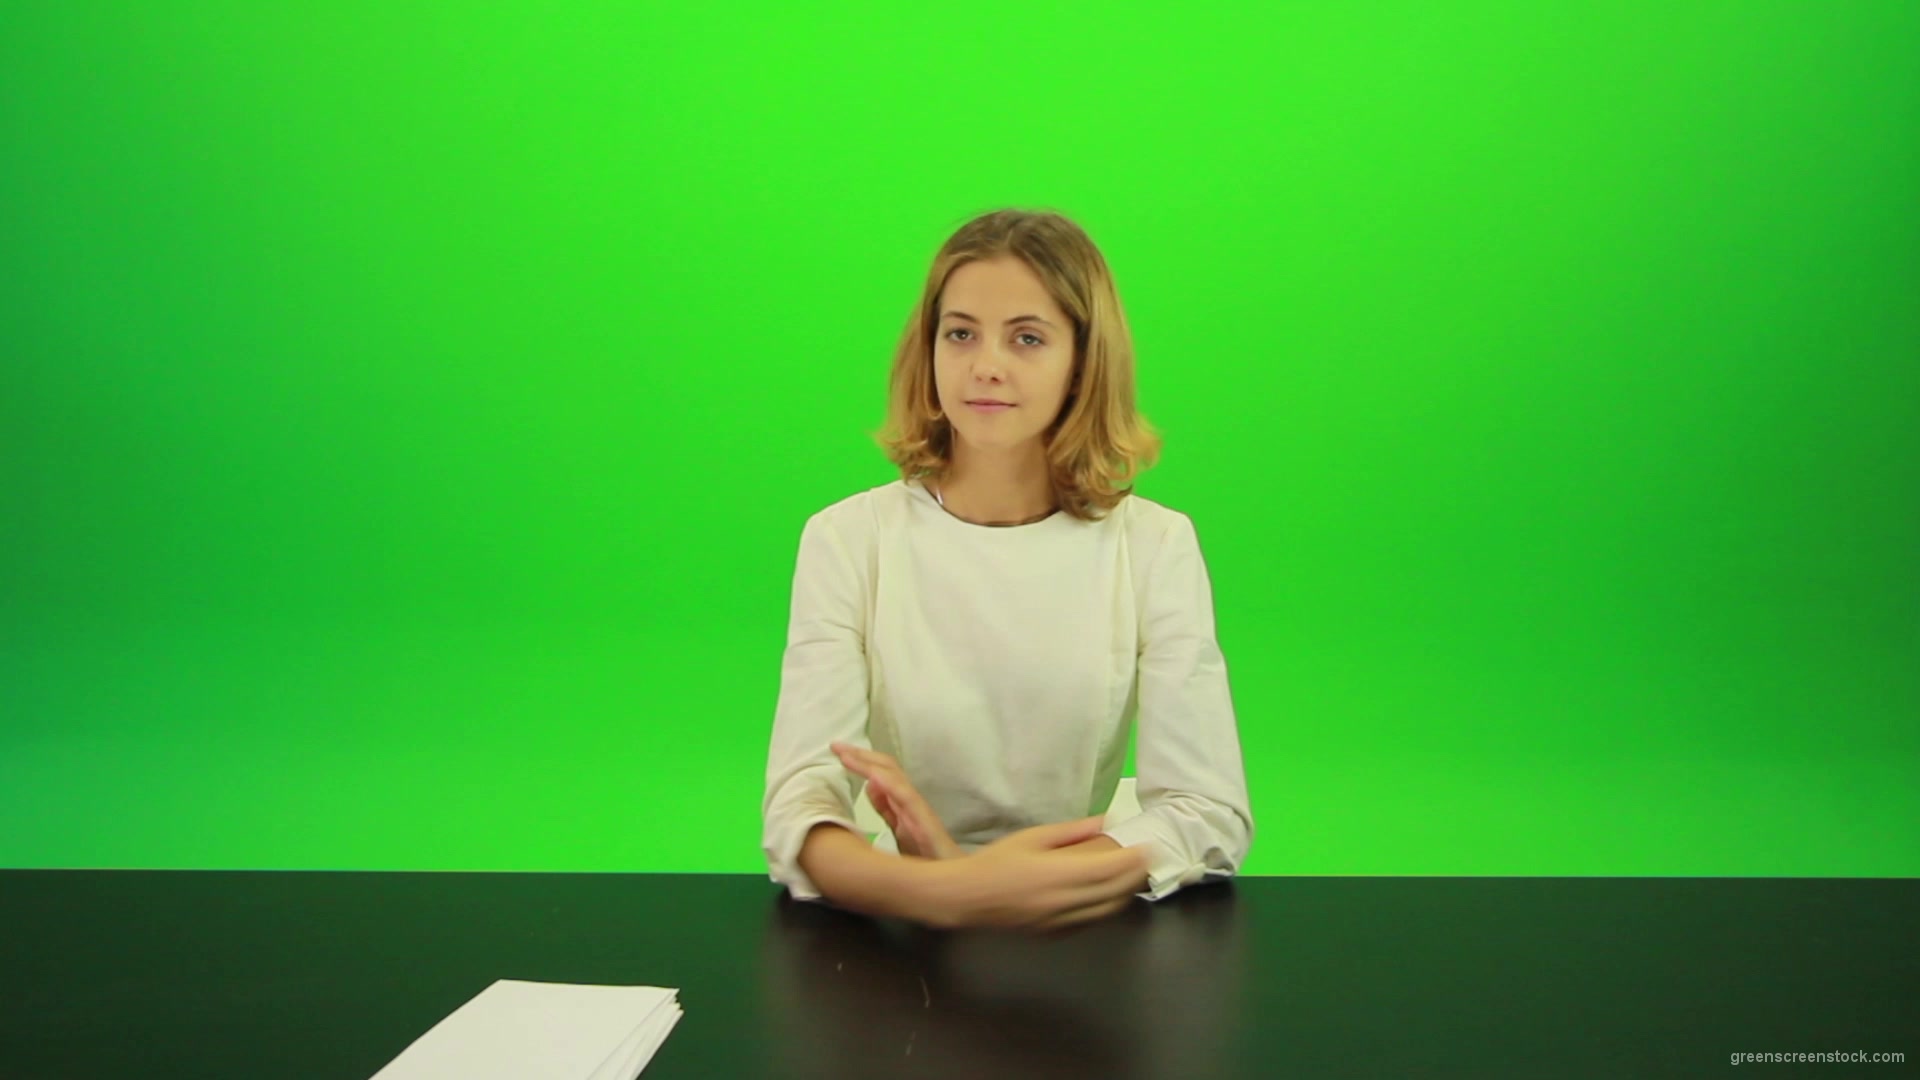 Blonde-hair-girl-in-white-shirt-give-3-point-mark-score-Full-HD-Green-Screen-Video-Footage_008 Green Screen Stock